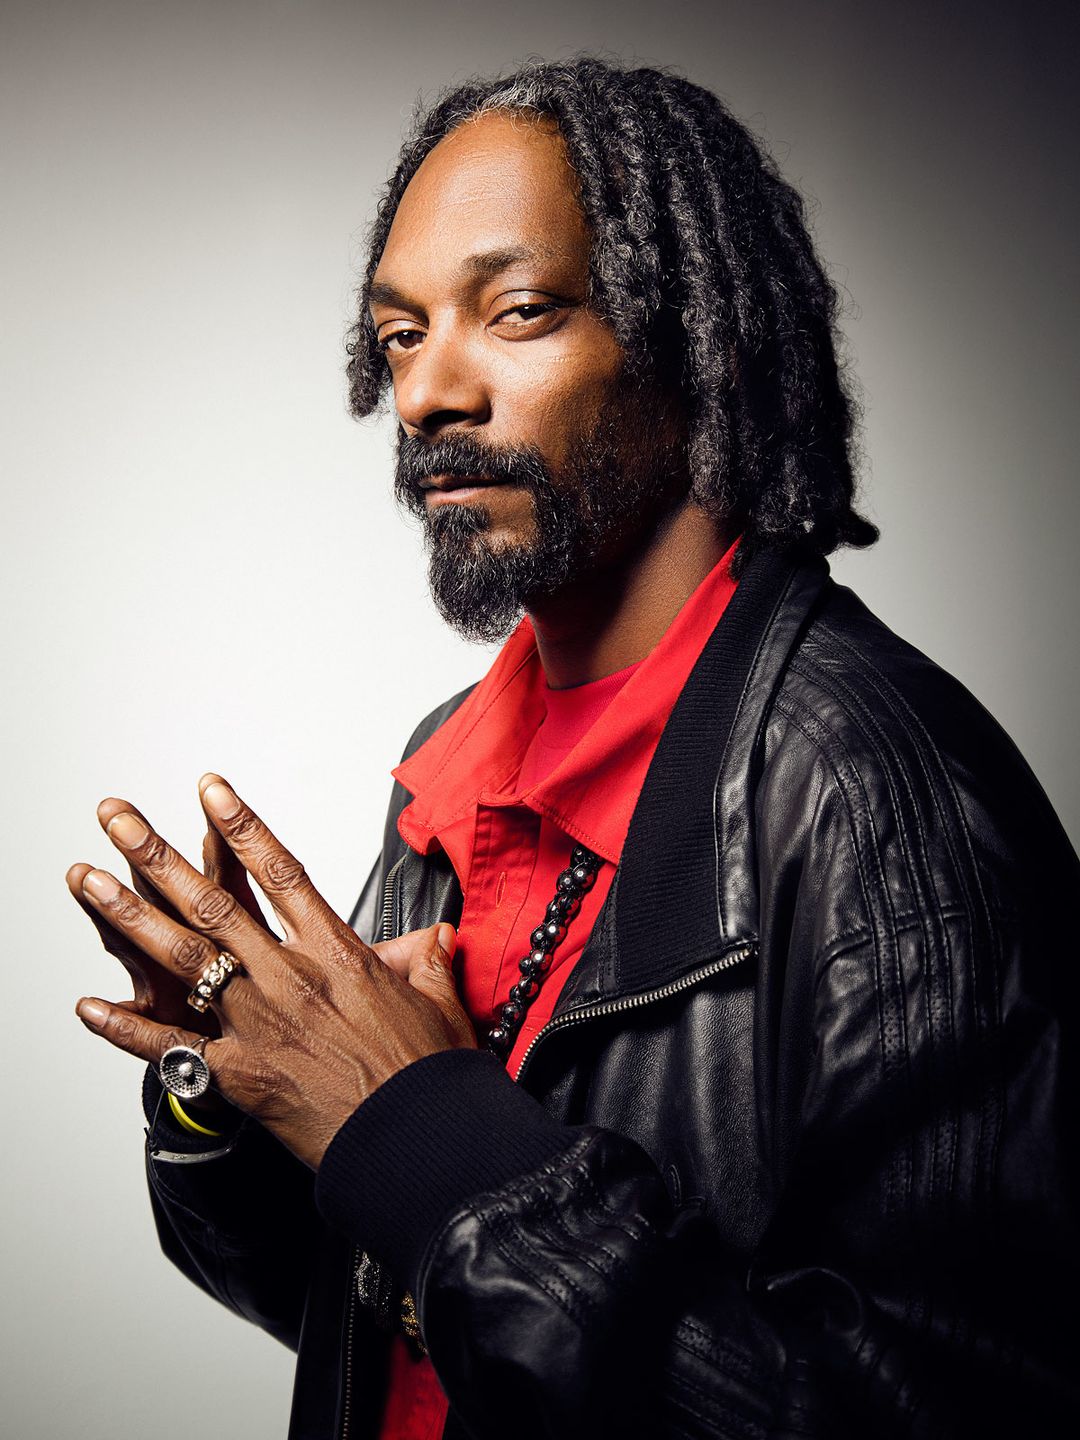 Snoop Dogg height and weight